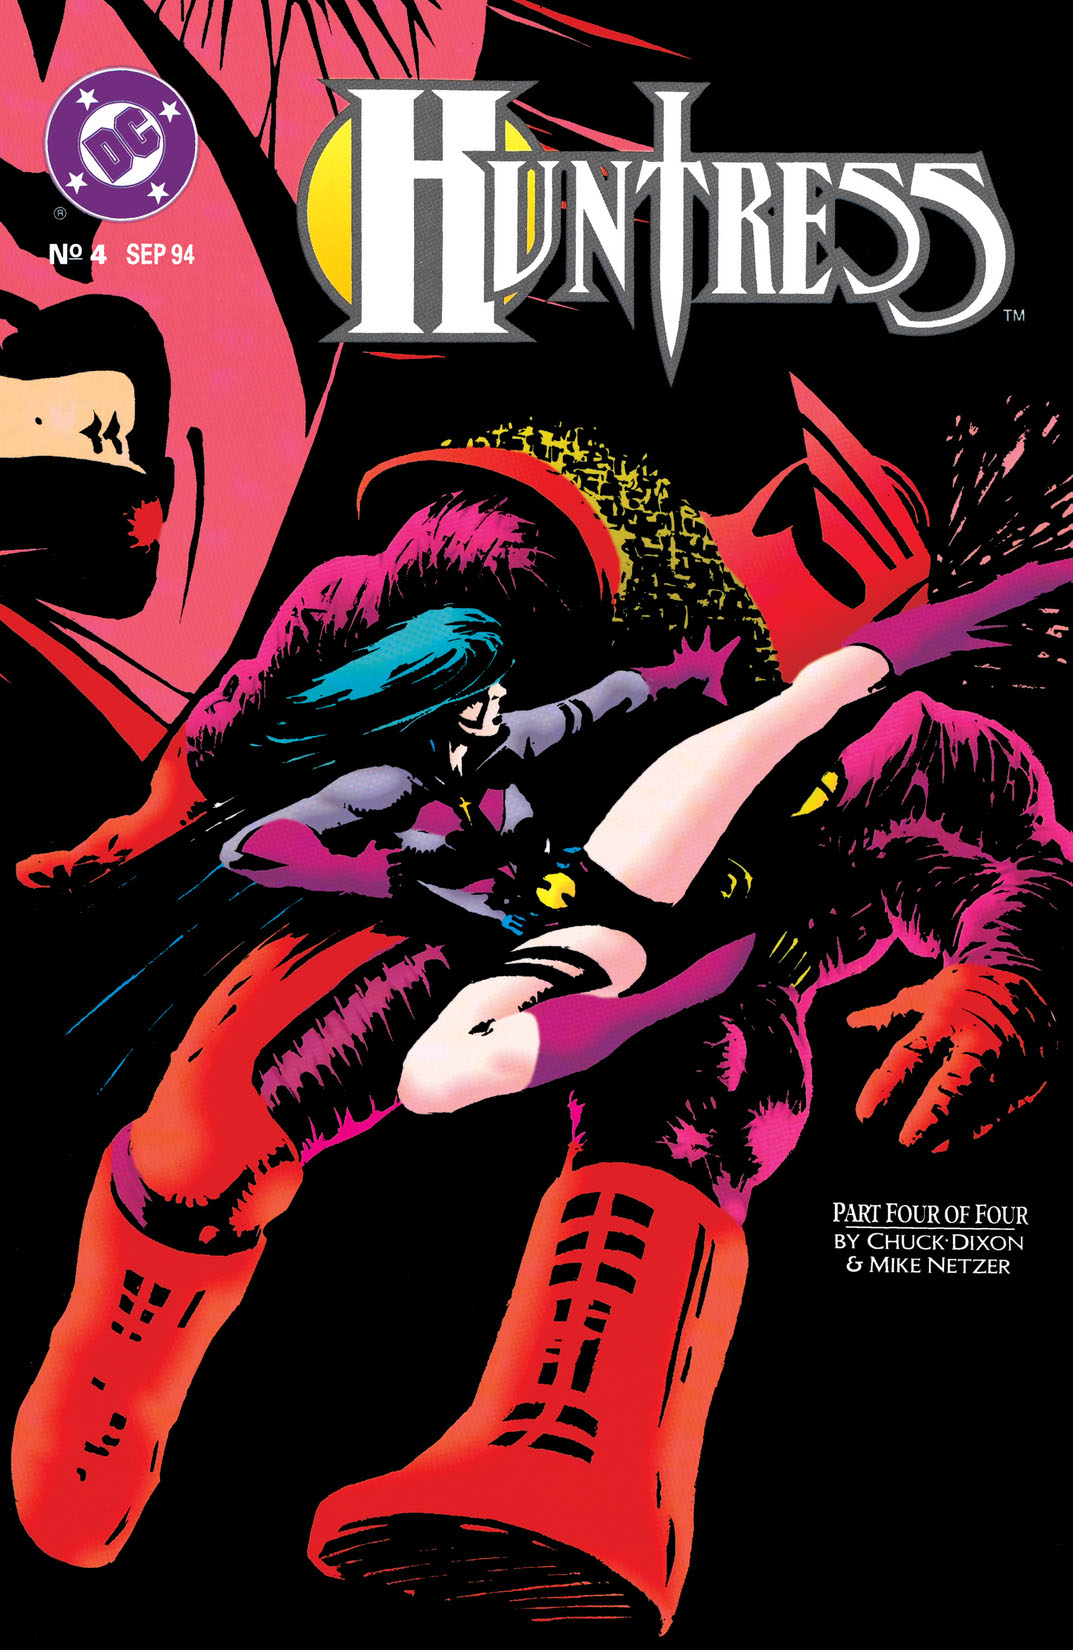 The Huntress (1994-) #4 preview images